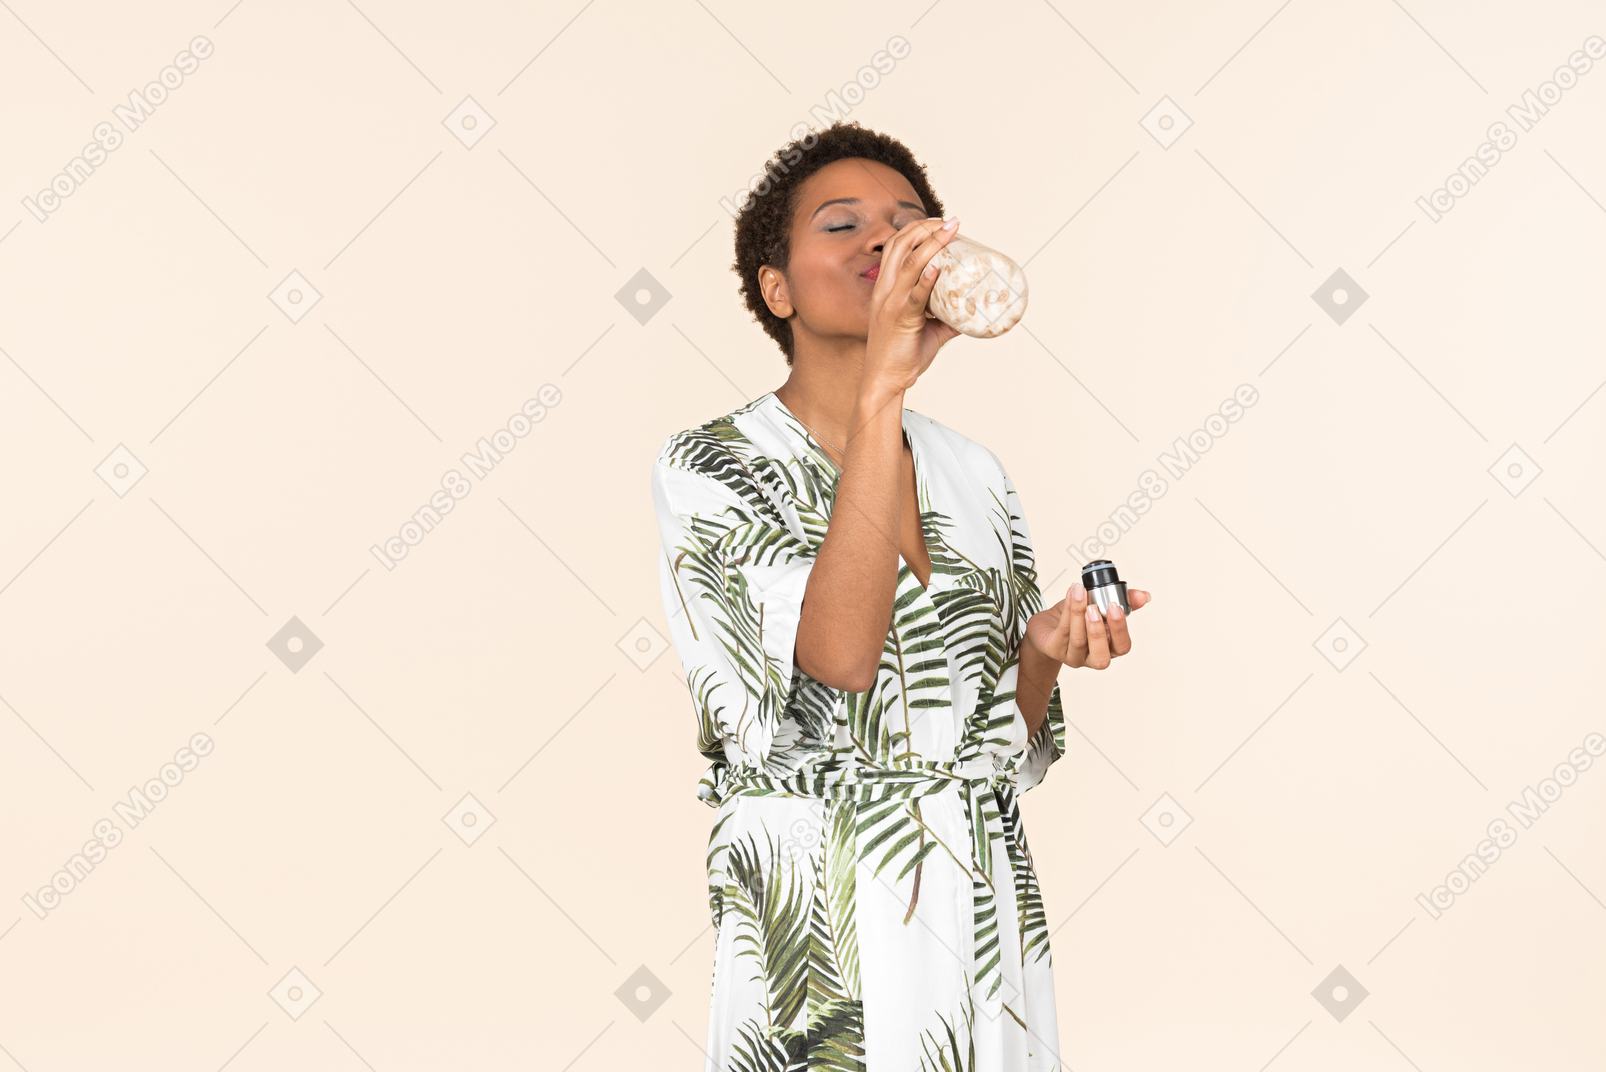 Young black short haired woman in a dressing gown, drinking from a reusable bottle